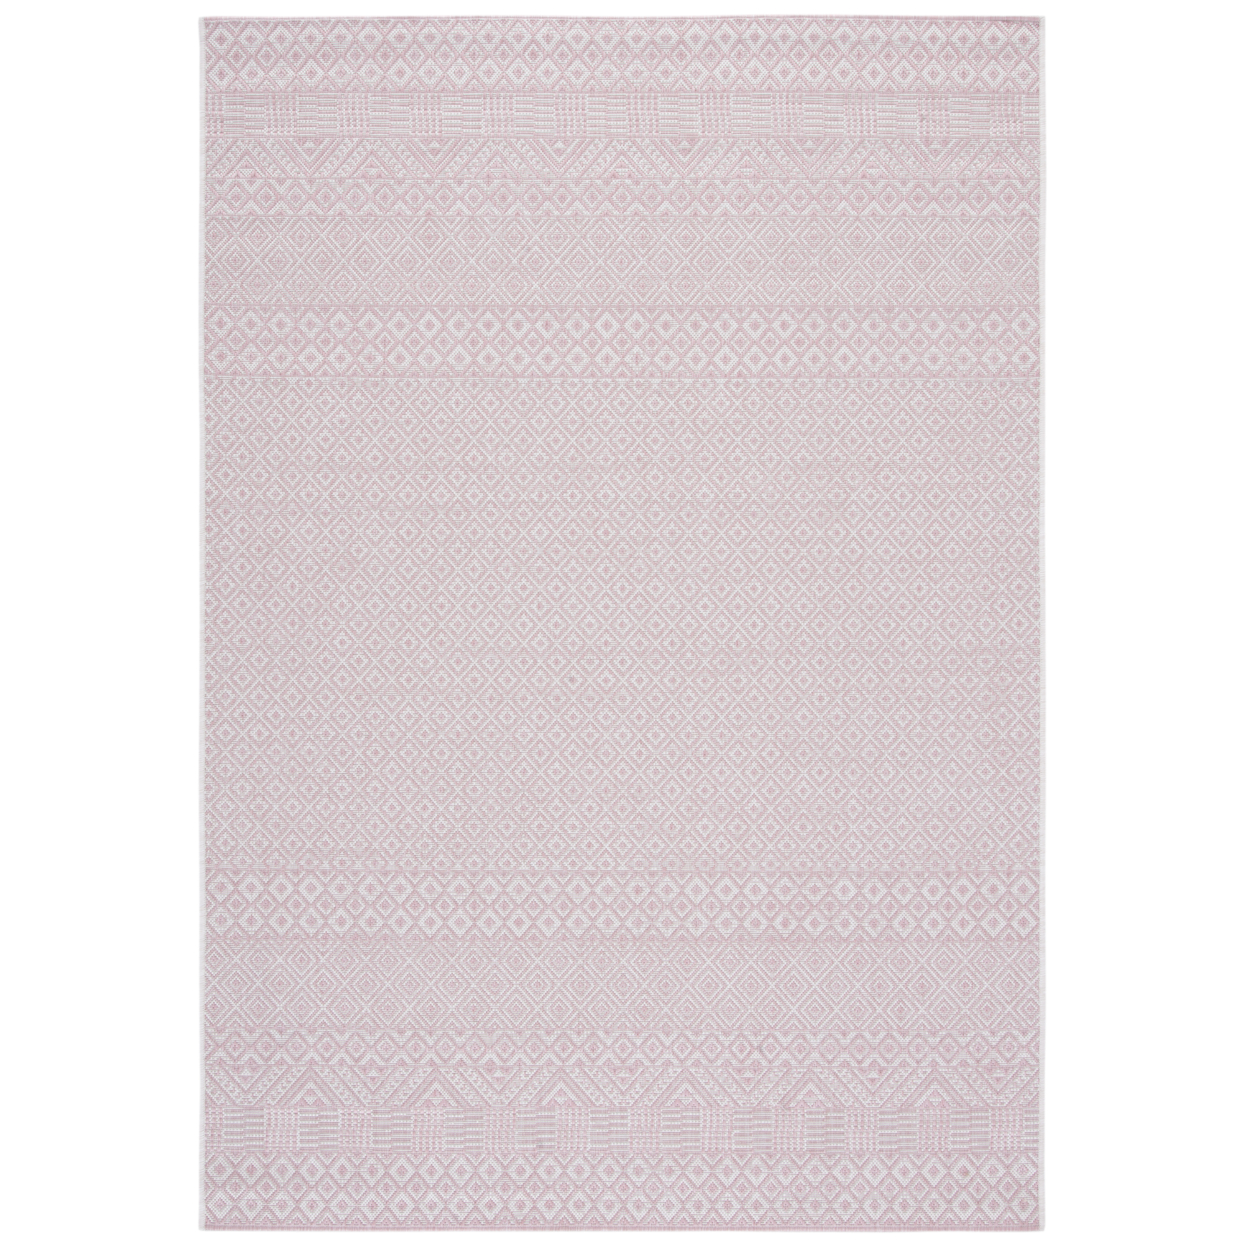 SAFAVIEH Outdoor CY8235-56212 Courtyard Ivory / Soft Pink Rug - 4' X 5' 7